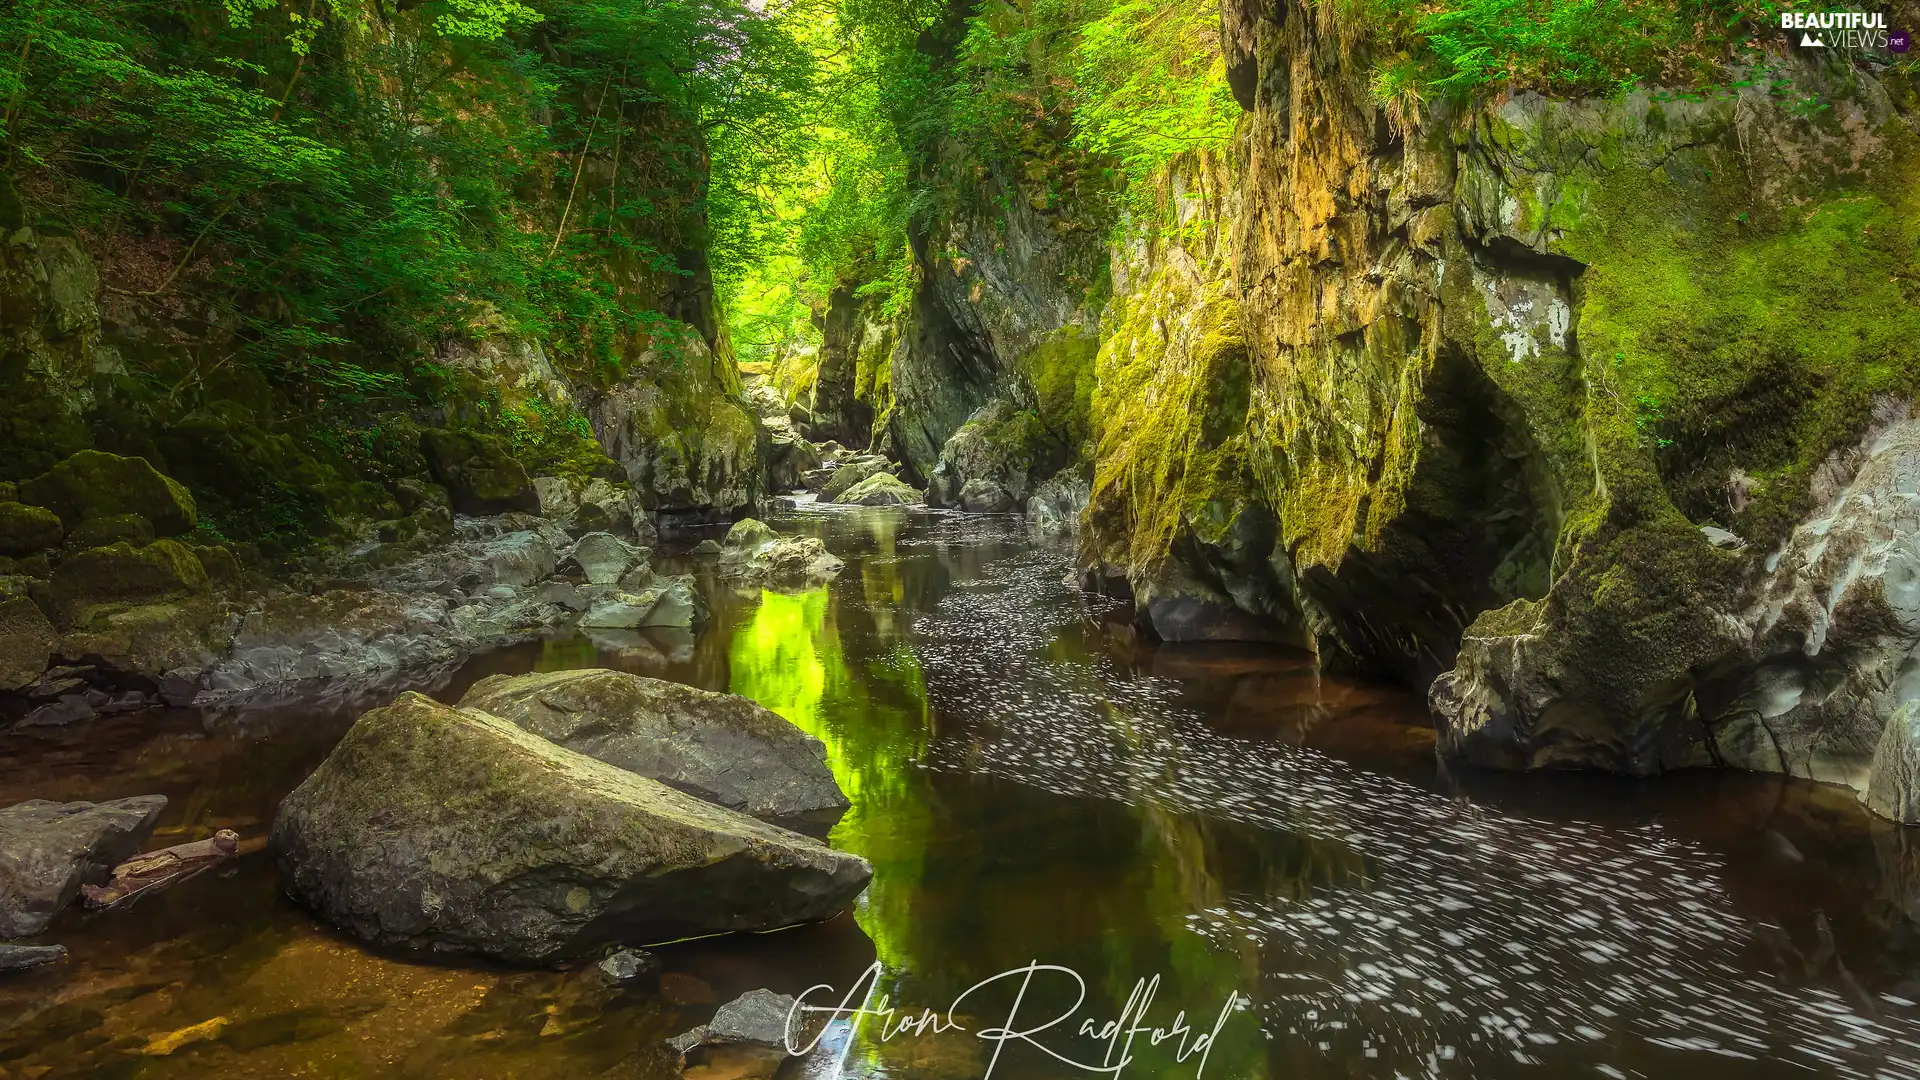 River Conwy, Fairy Glen Gorge, Betws y Coed Village, Snowdonia National Park, viewes, wales, rocks, trees, Stones